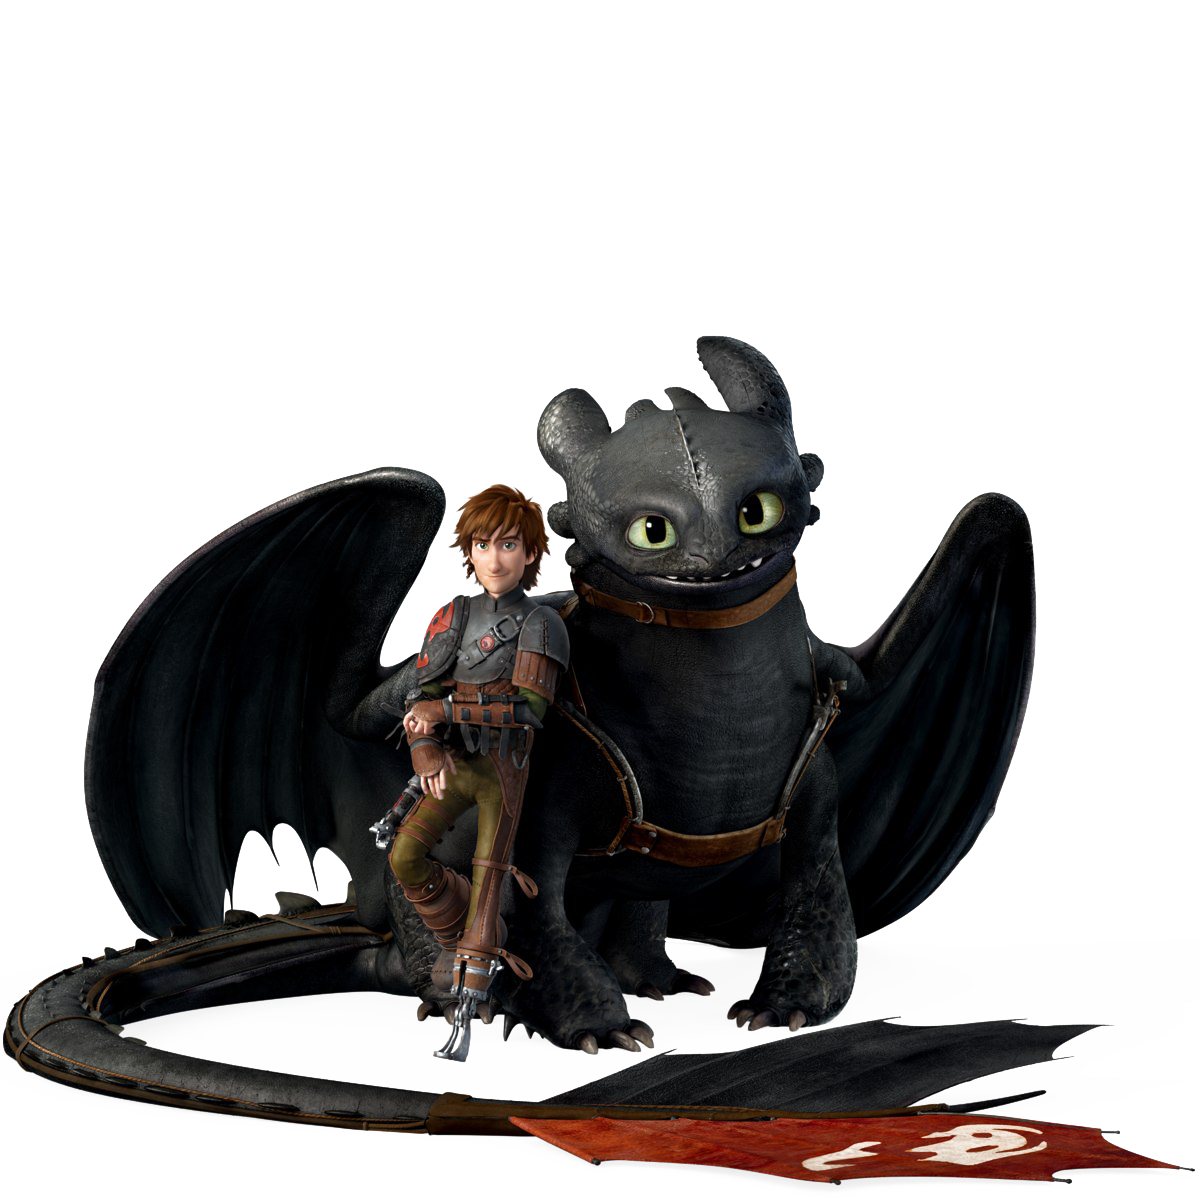 Download PNG image - Toothless PNG Image HD 